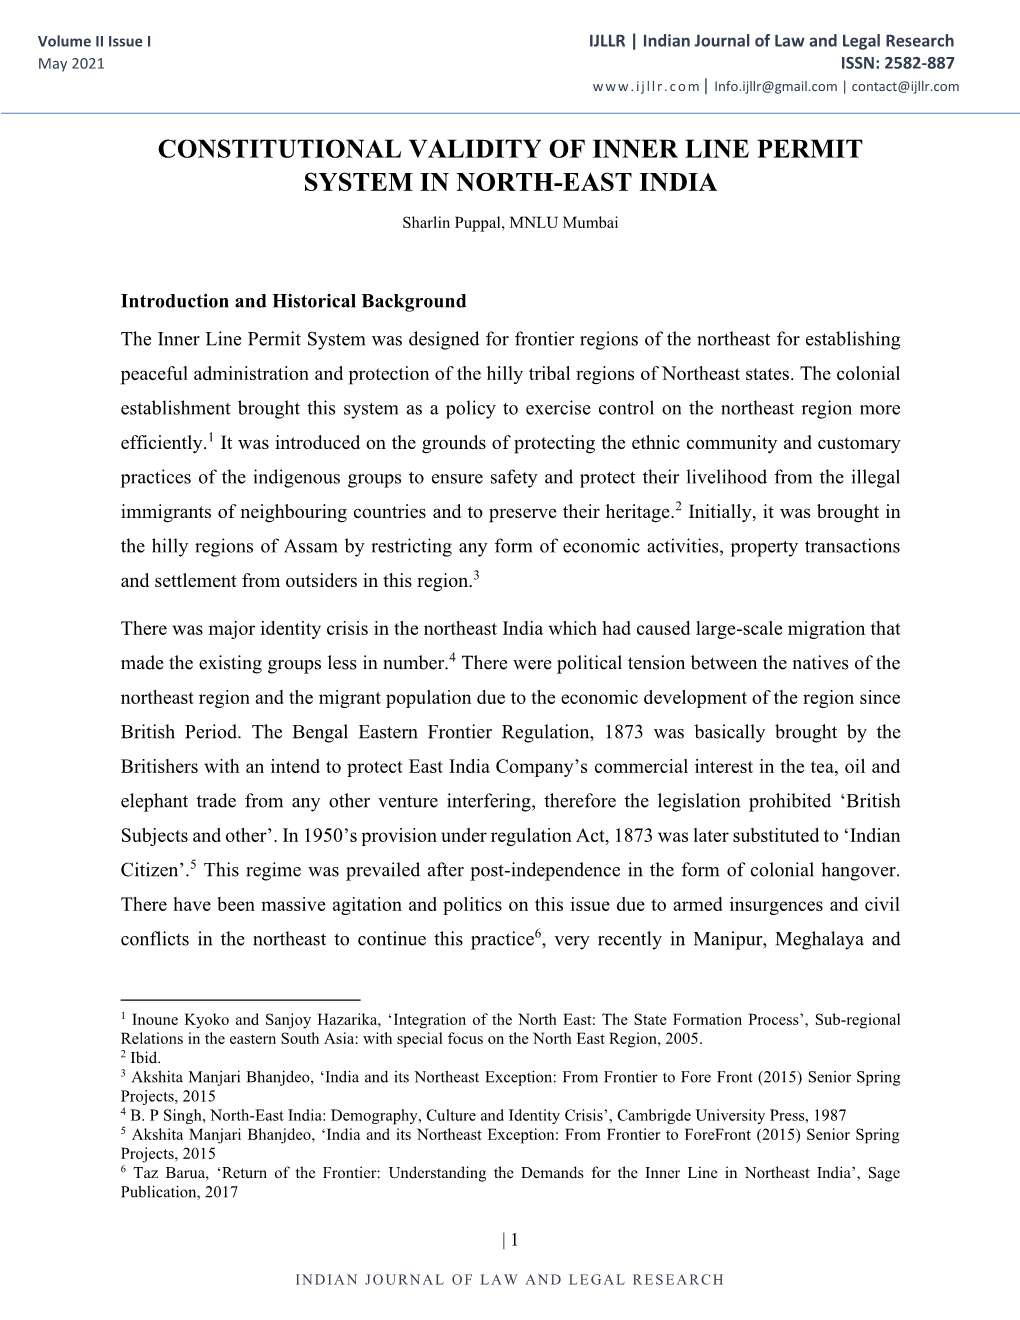 Constitutional Validity of Inner Line Permit System in North-East India